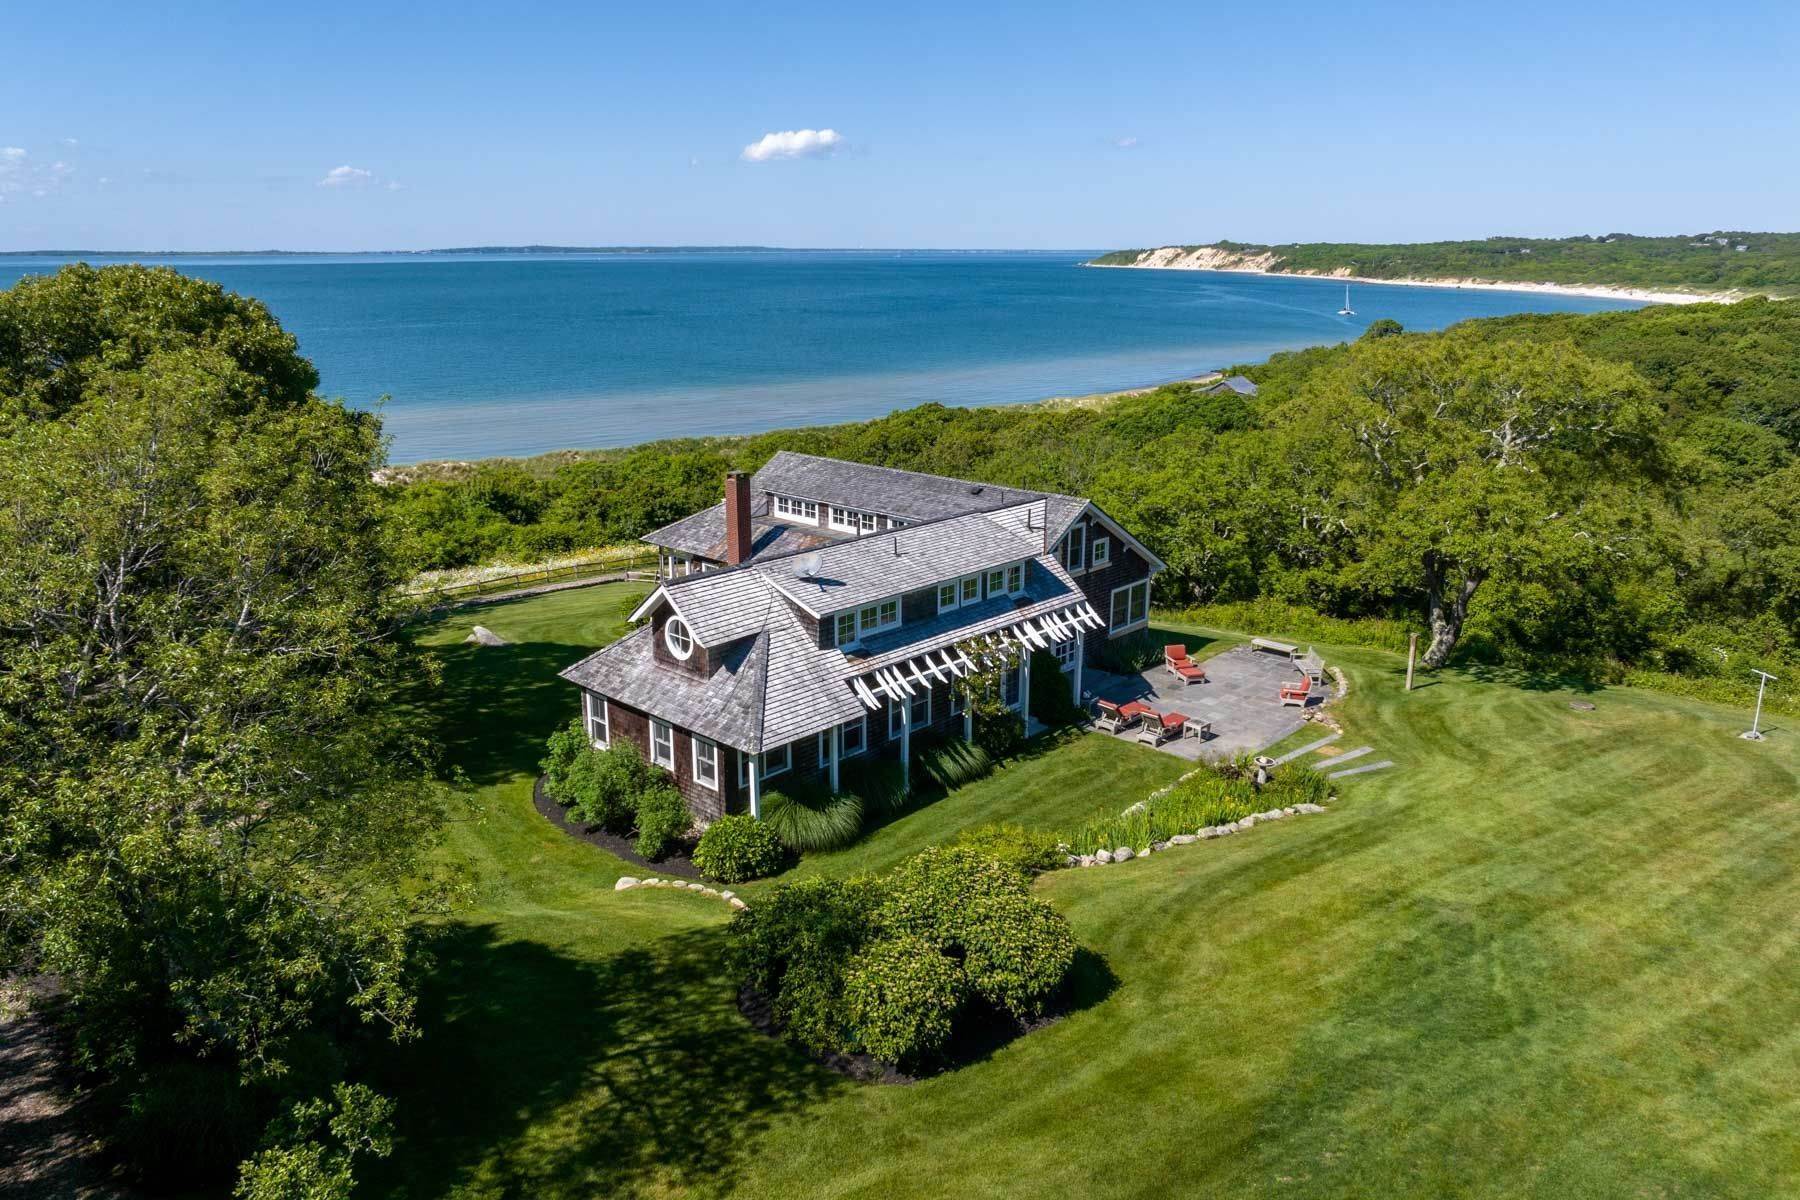 Single Family Homes for Sale at Waterfront Old Herring Creek Estate 104 and 111 Old Herring Creek Road West Tisbury, Massachusetts 02575 United States